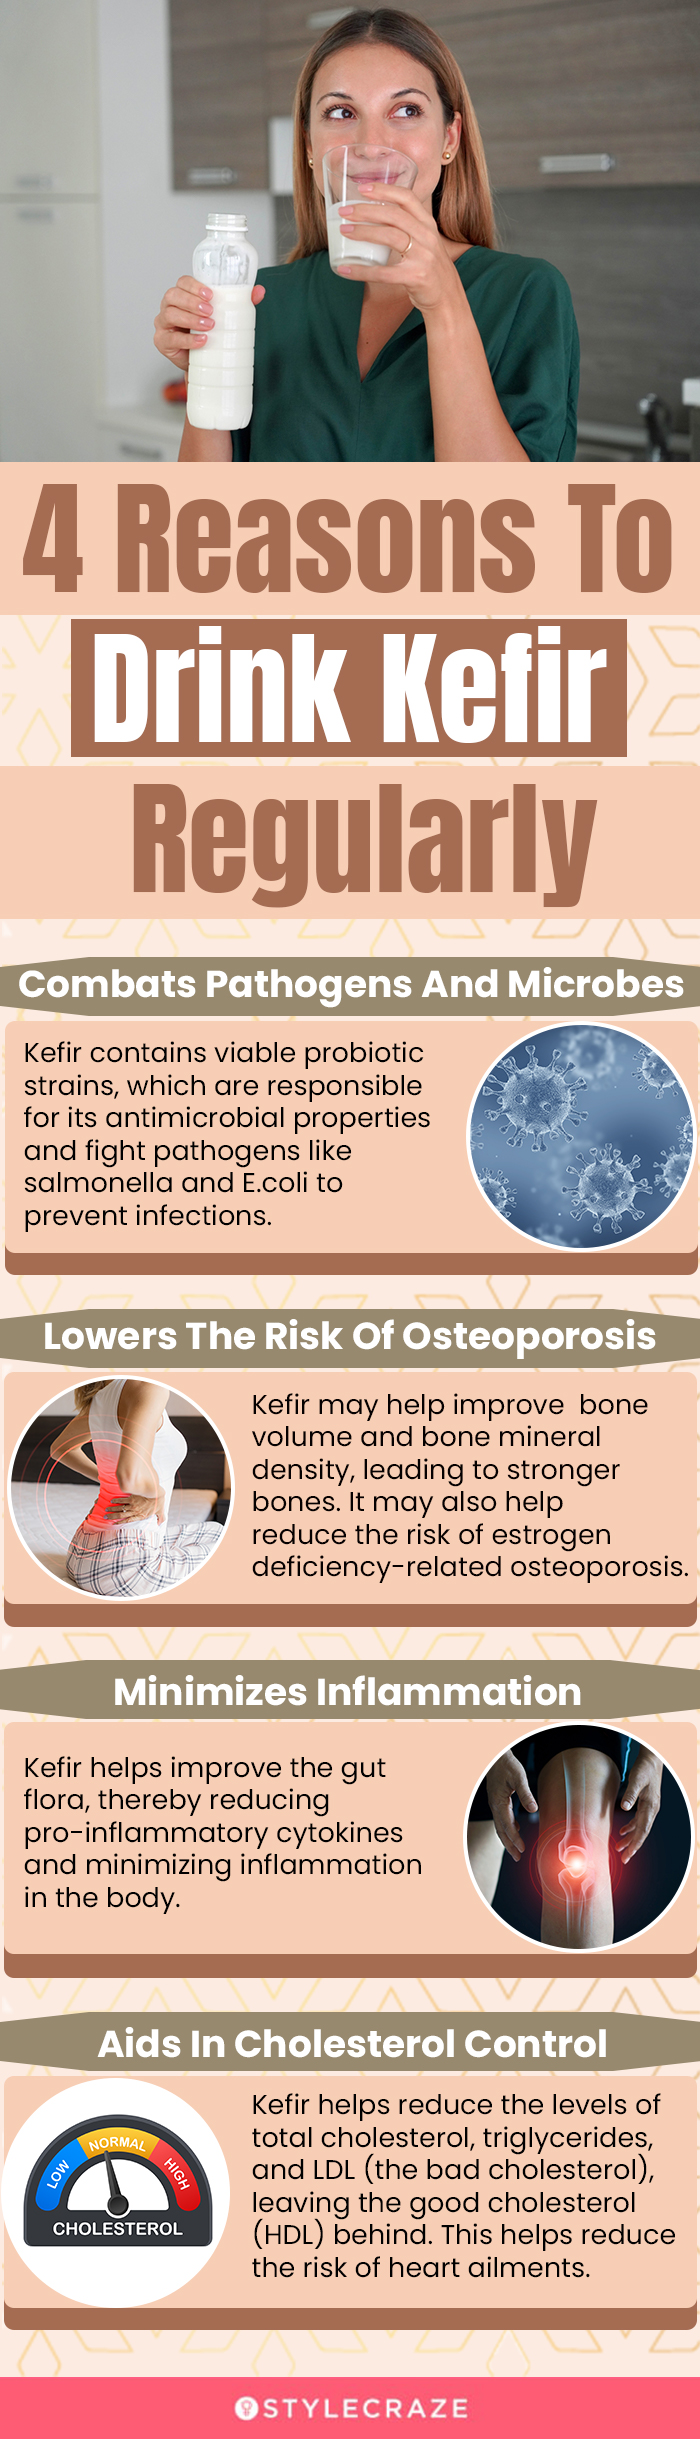 4 reasons to drink kefir regularly(infographic)